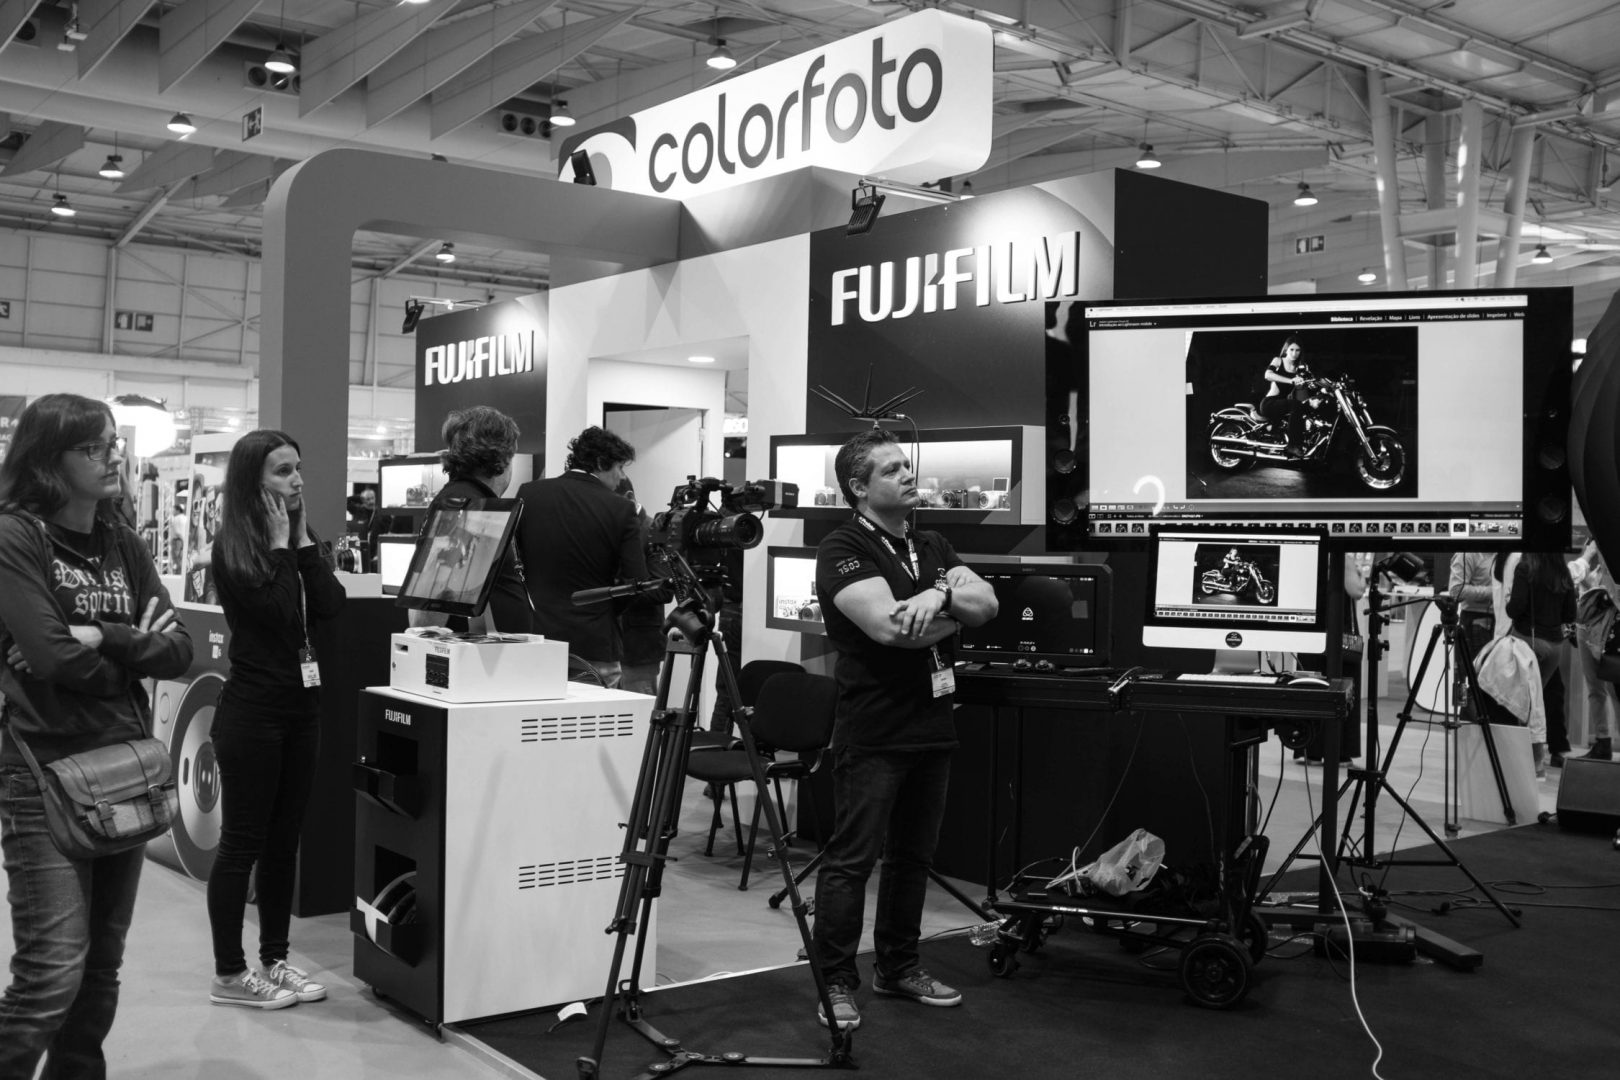 Eduardo Lima from Colorfoto always available to help